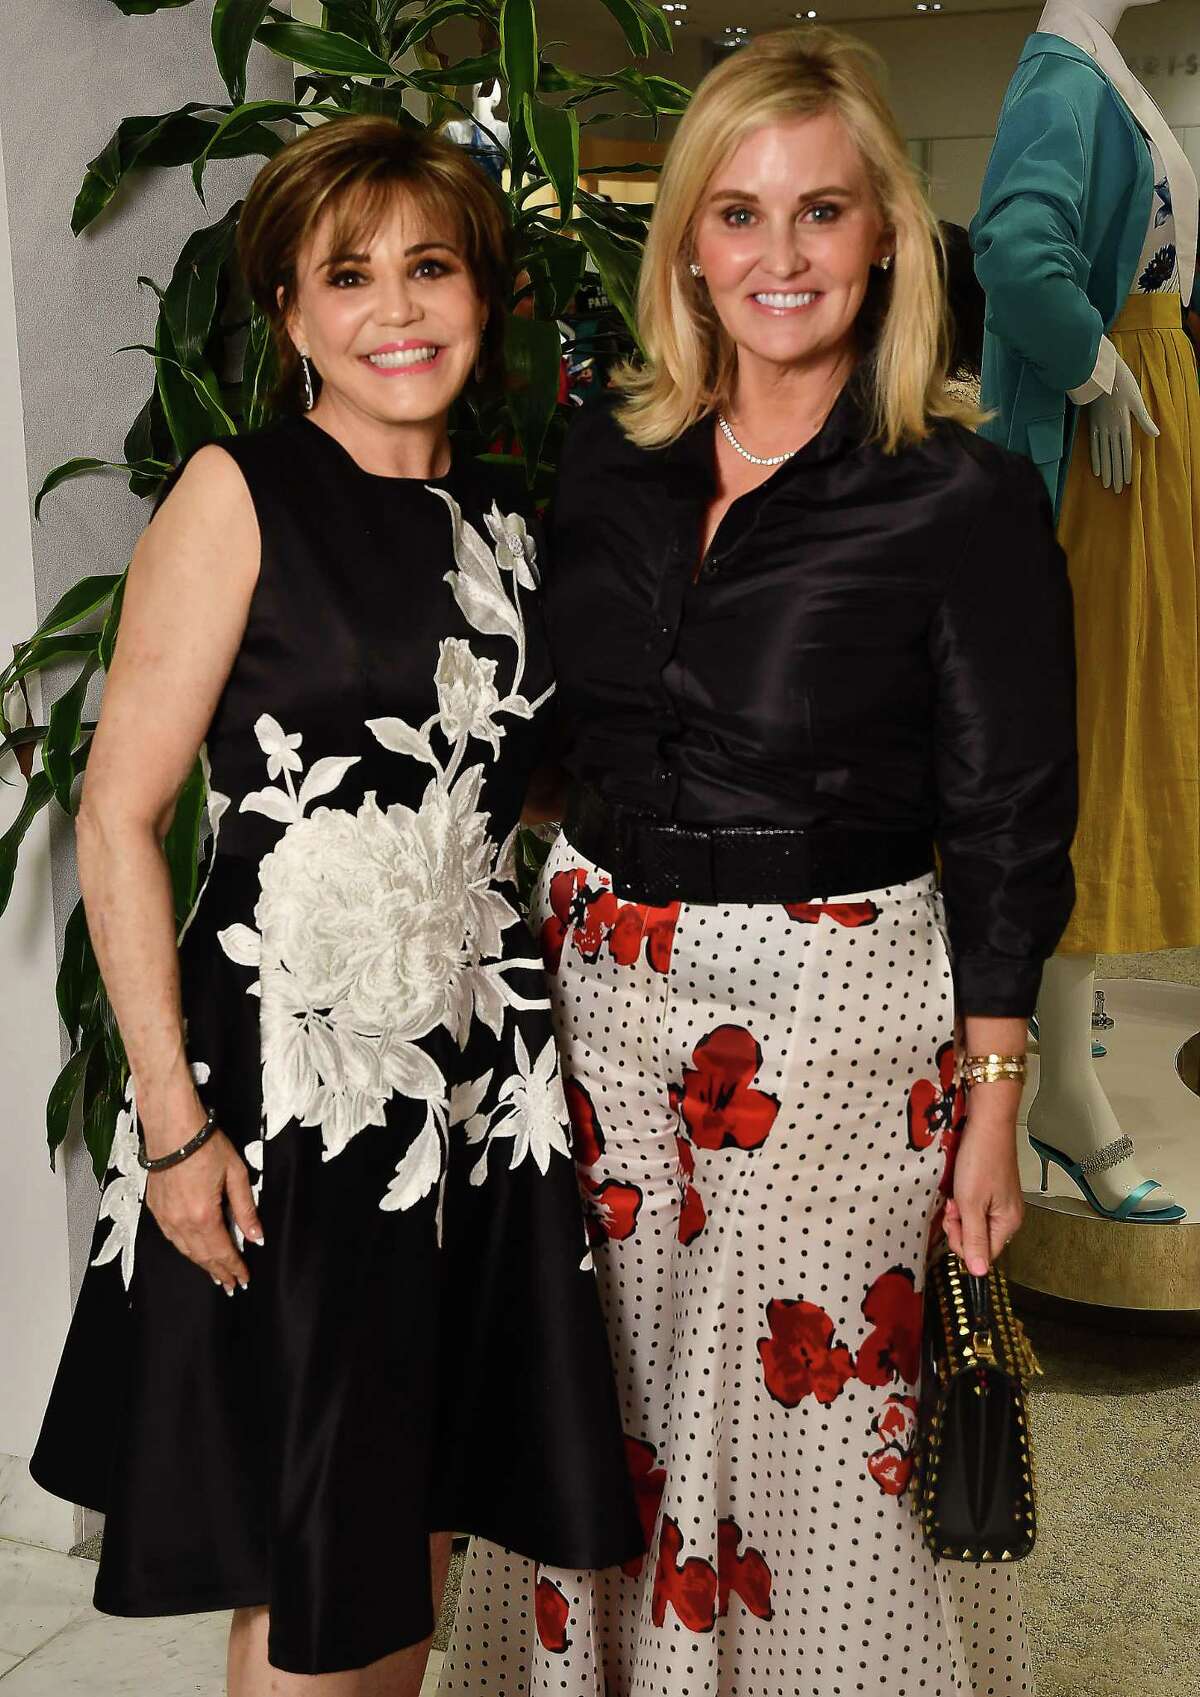 It's a Golden Celebration at Neiman Marcus' 50th Anniversary Bash - Fashion  Blogger From Houston Texas